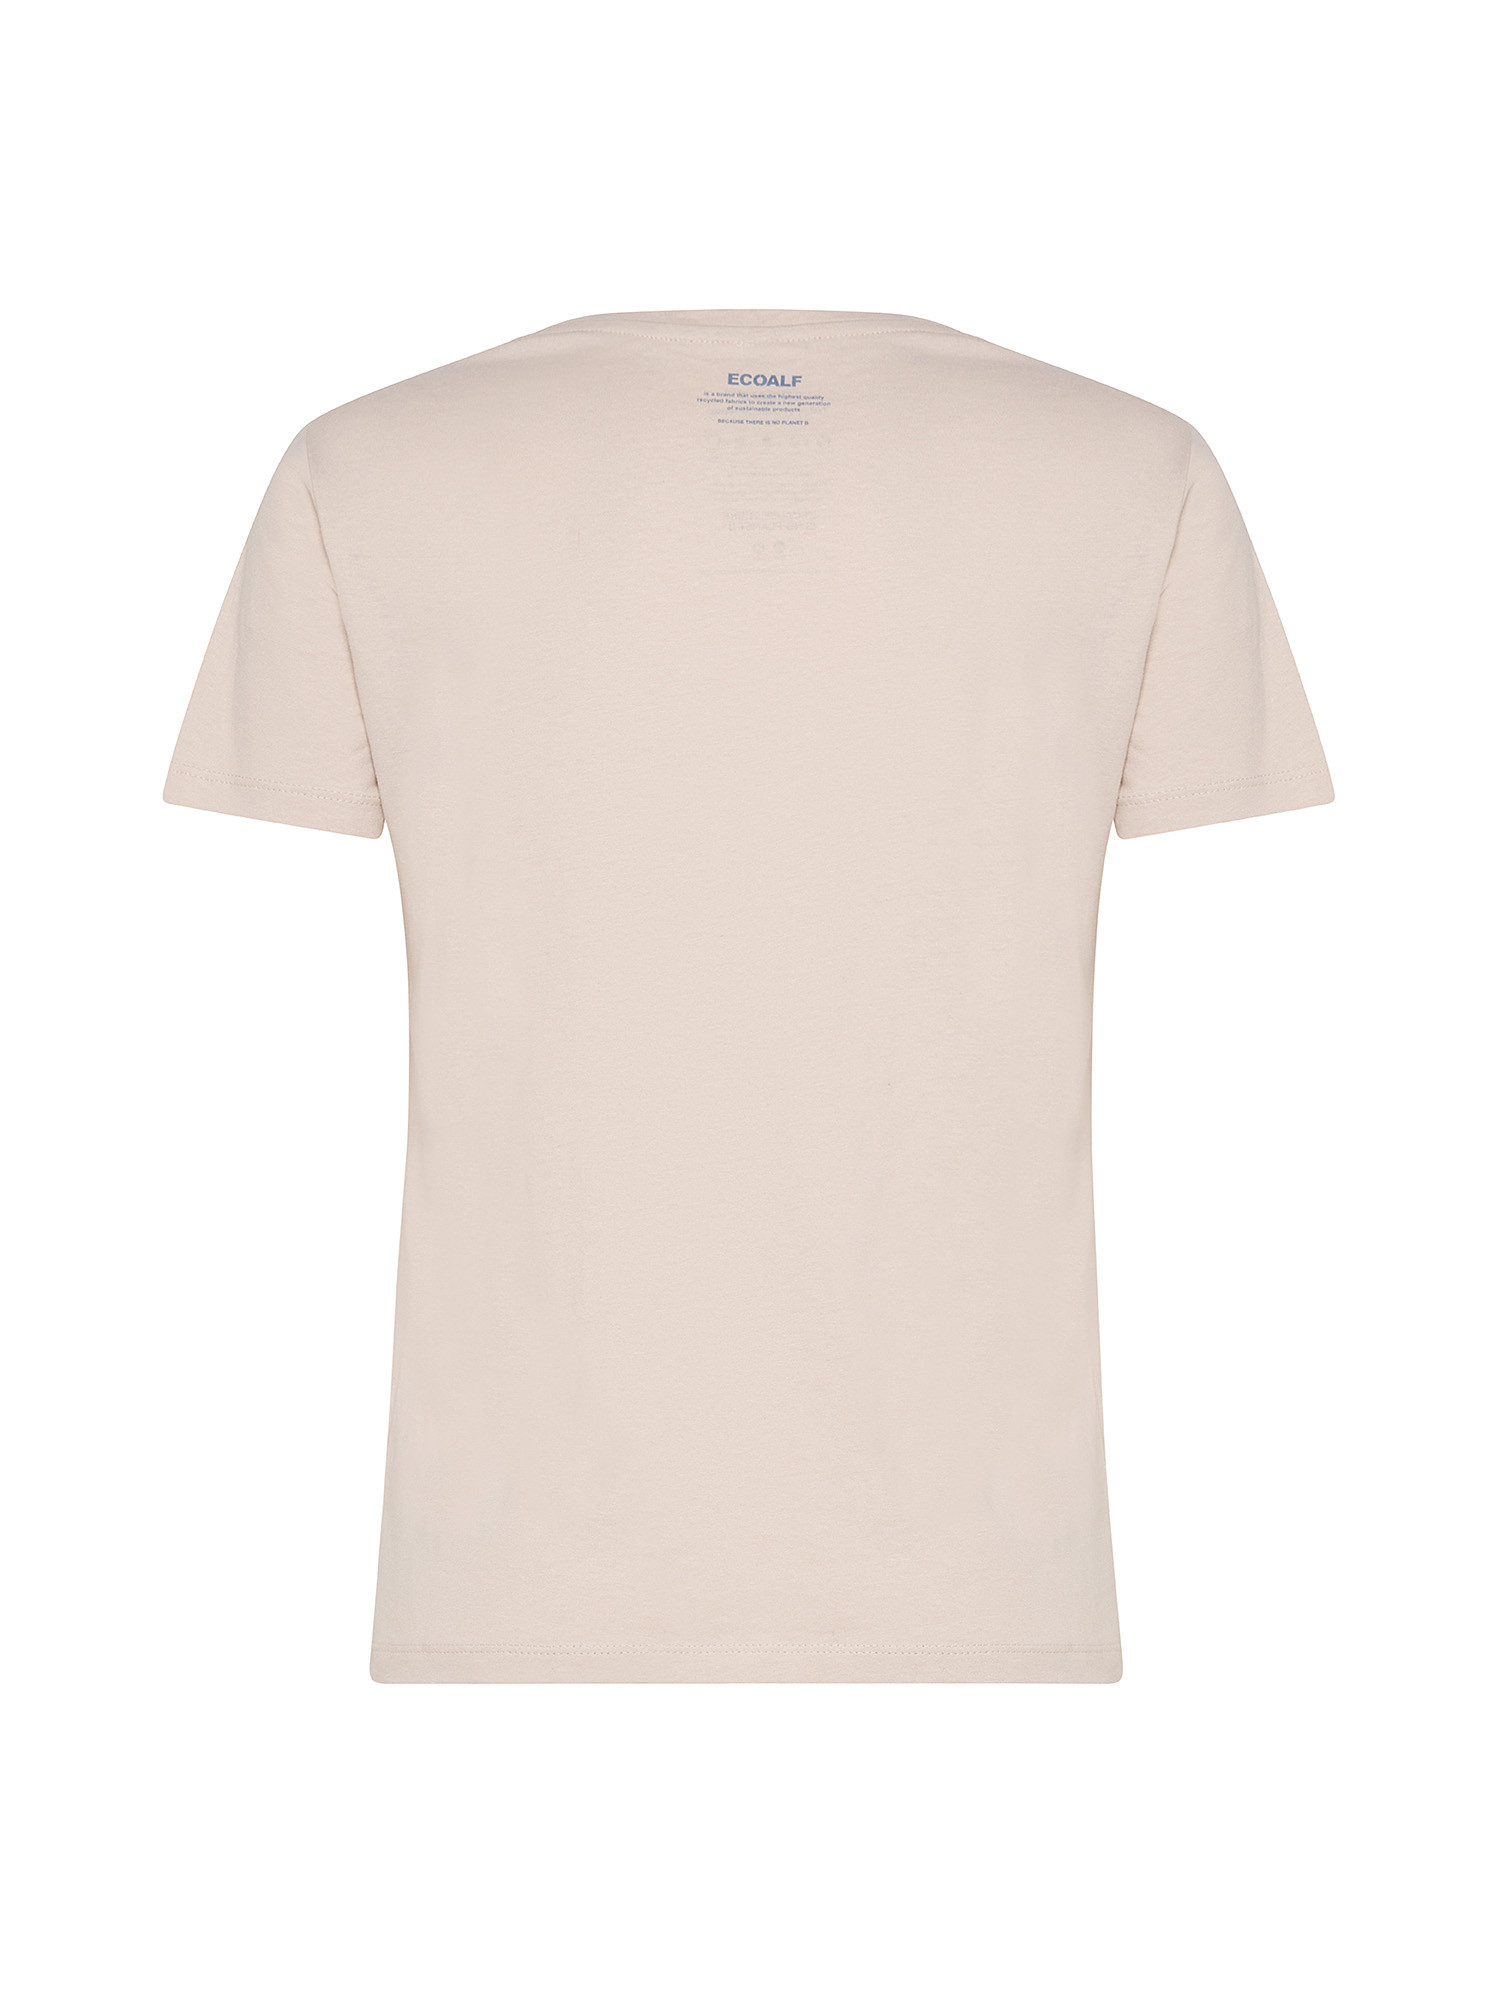 Ecoalf - T-shirt Stay con stampa, Beige chiaro, large image number 1